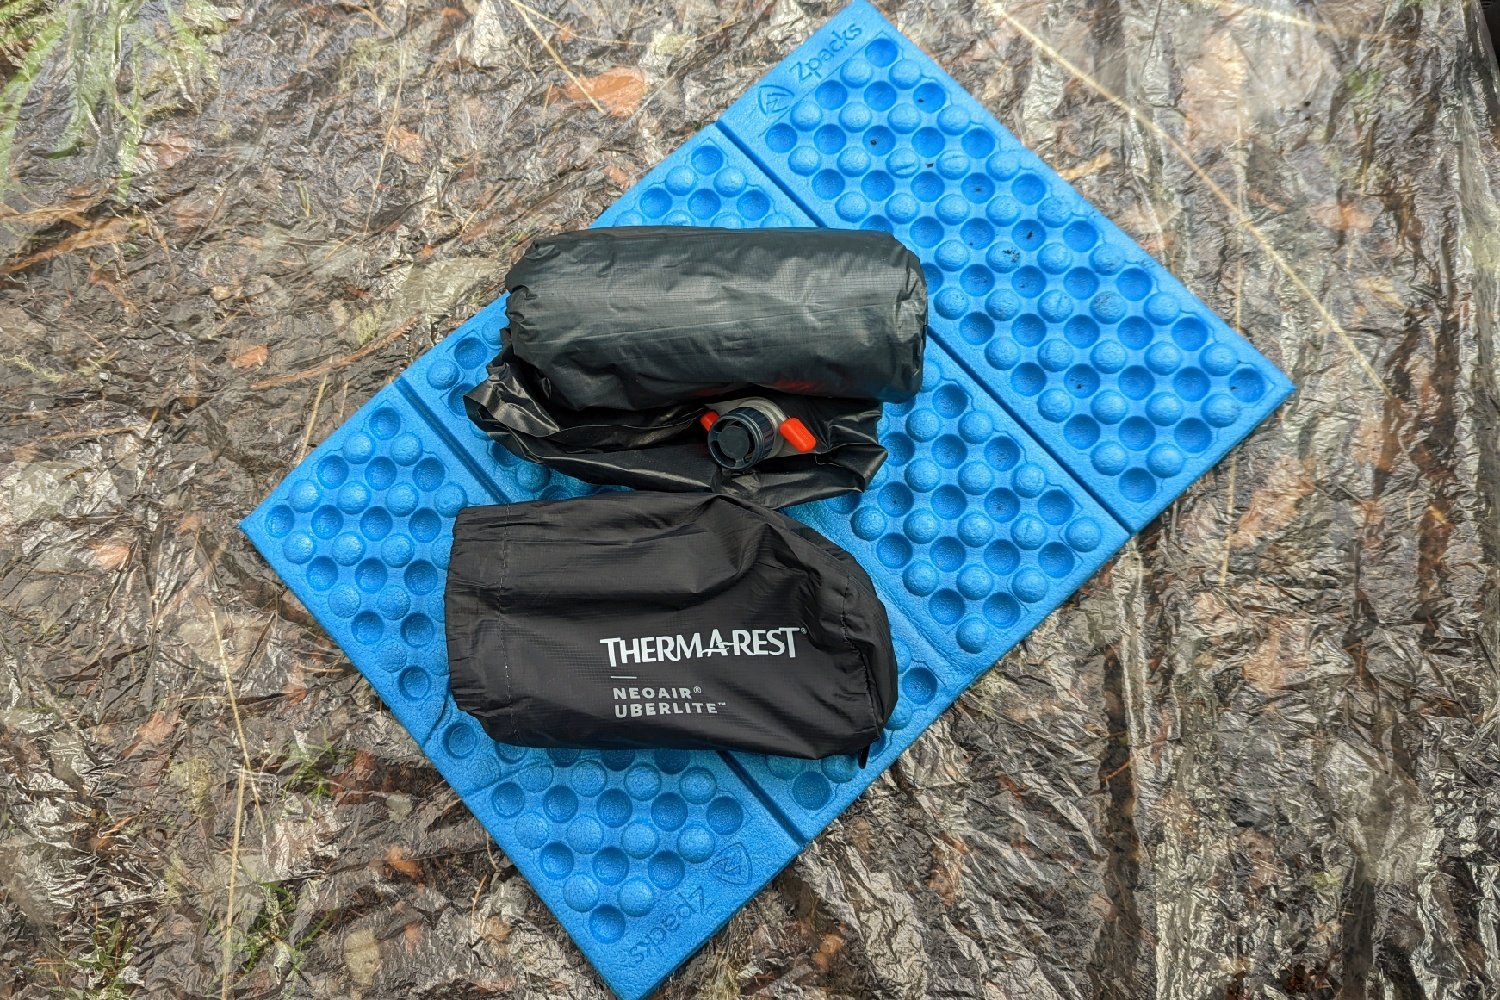 A Therm-a-Rest Uberlite sitting next to its stuff sack on a sit pad